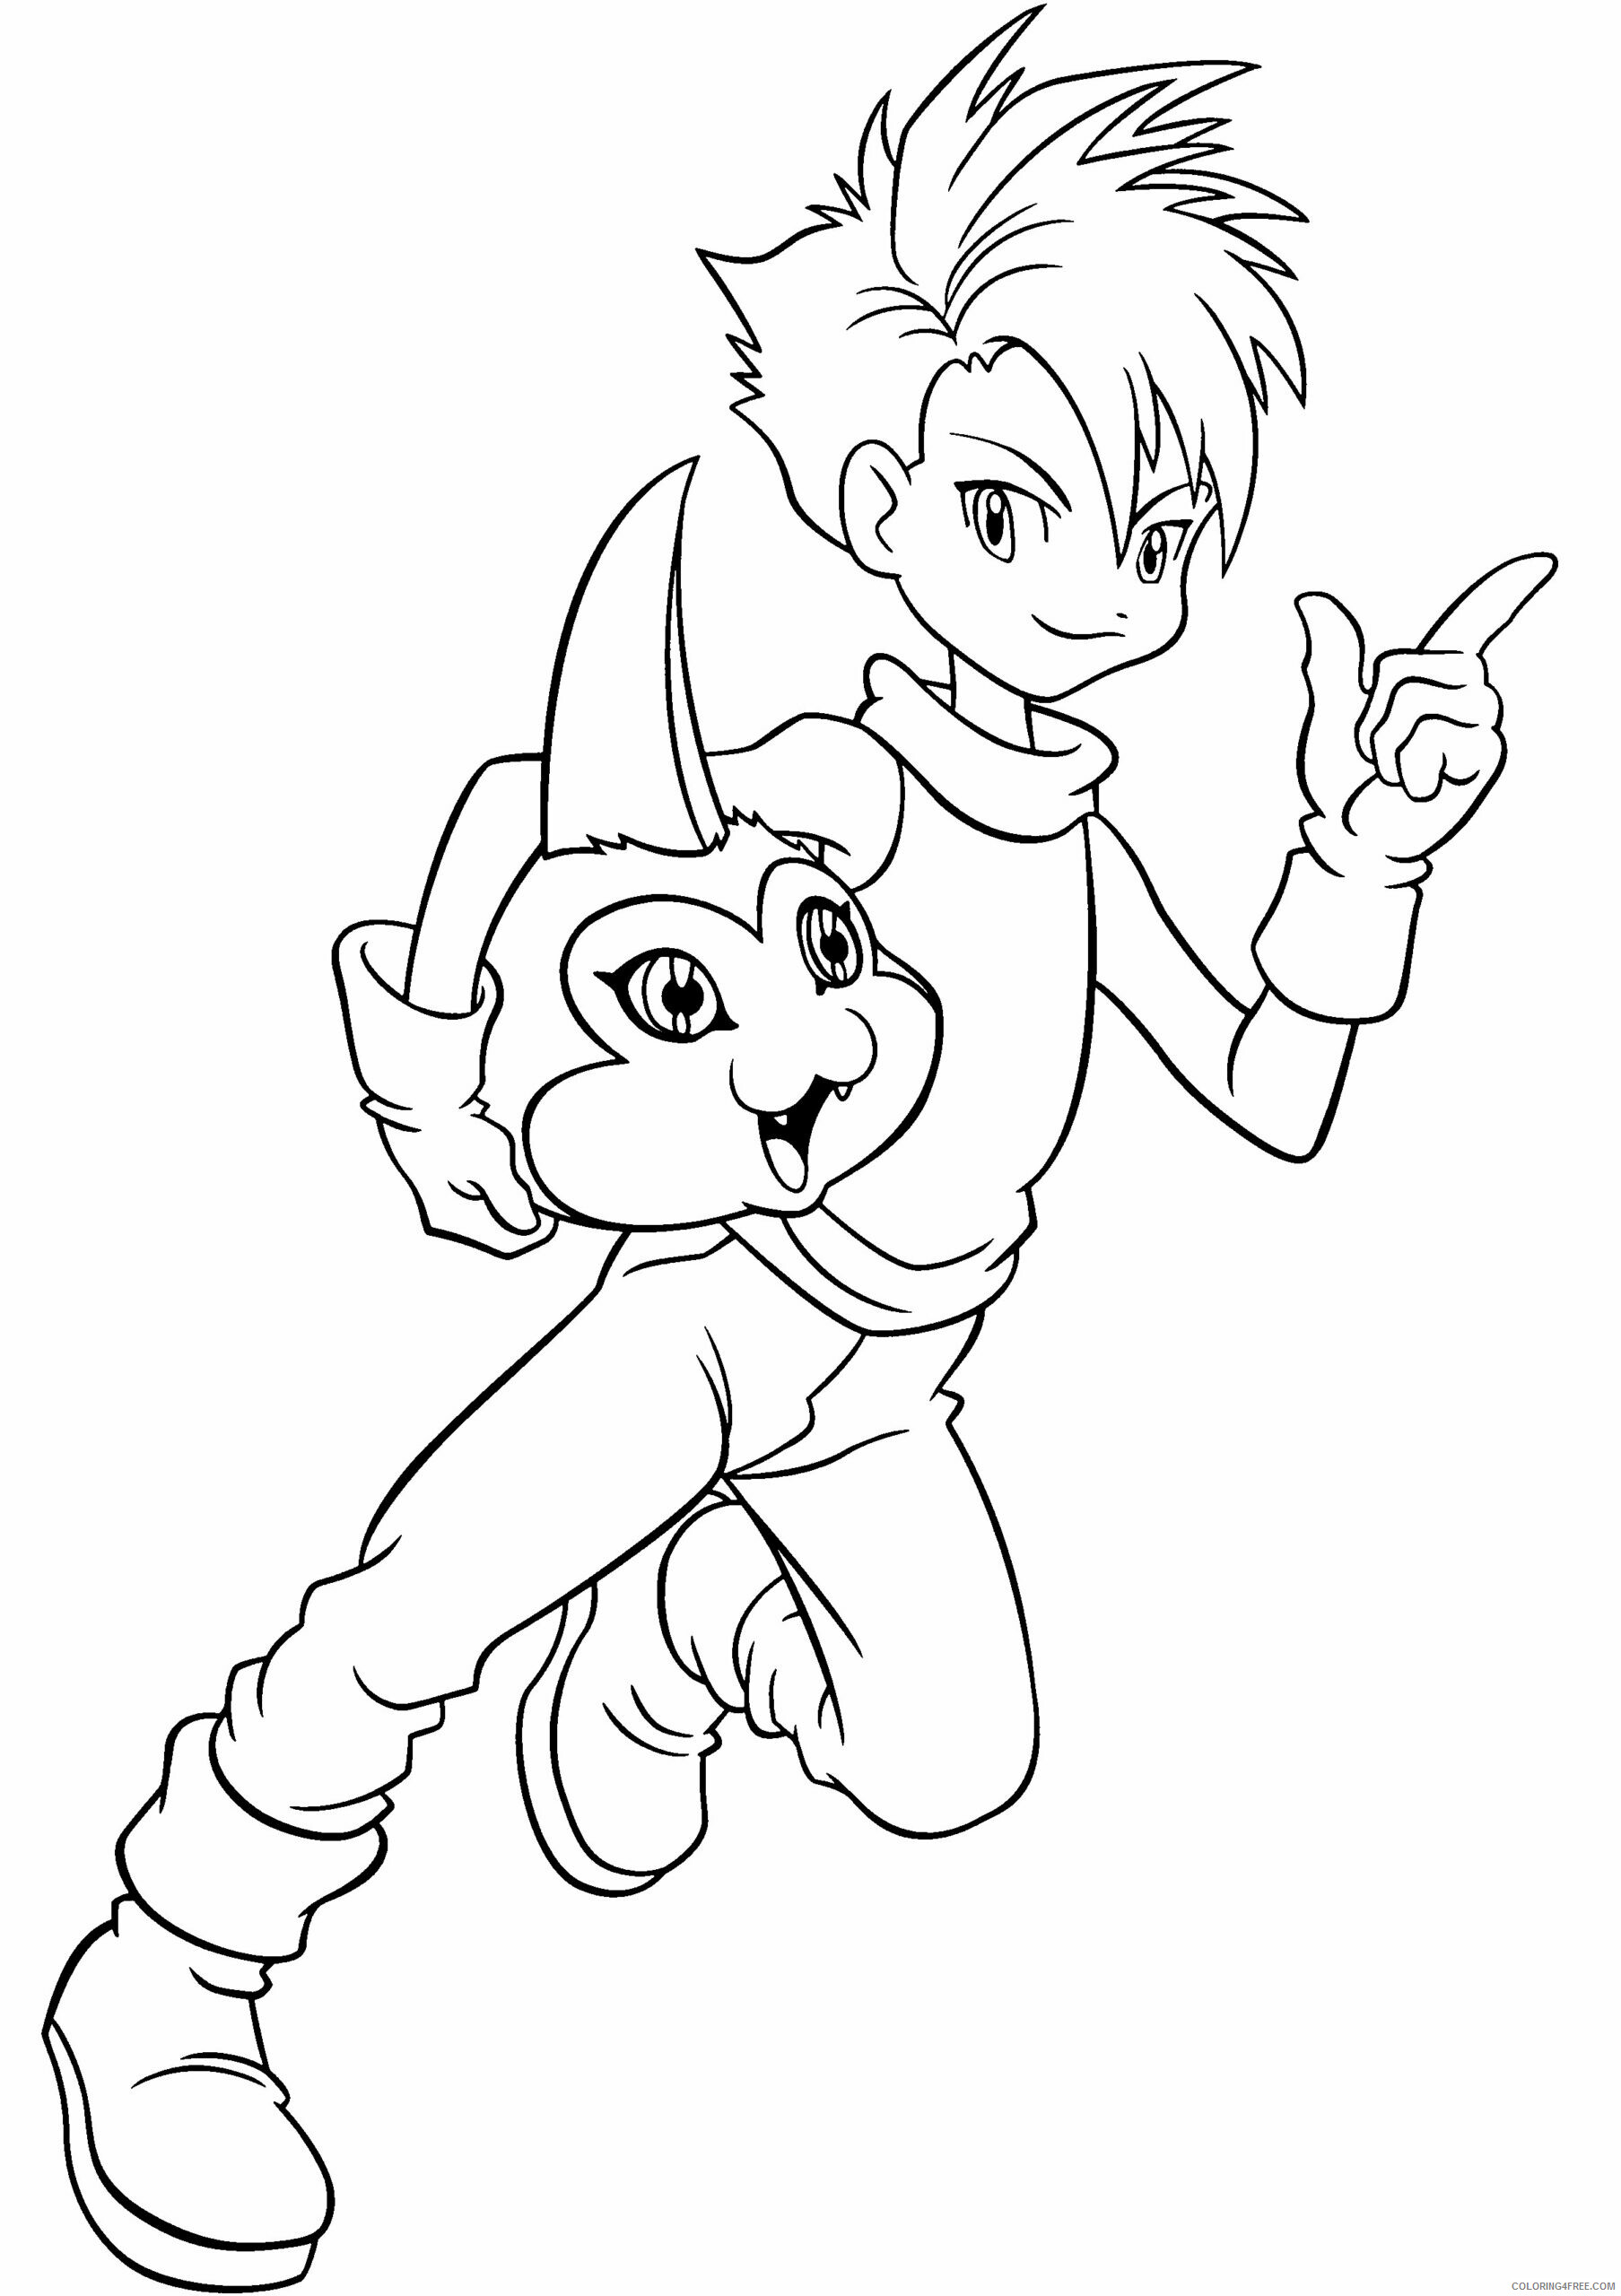 Digimon Printable Coloring Pages Anime digimon 123 2021 0230 Coloring4free